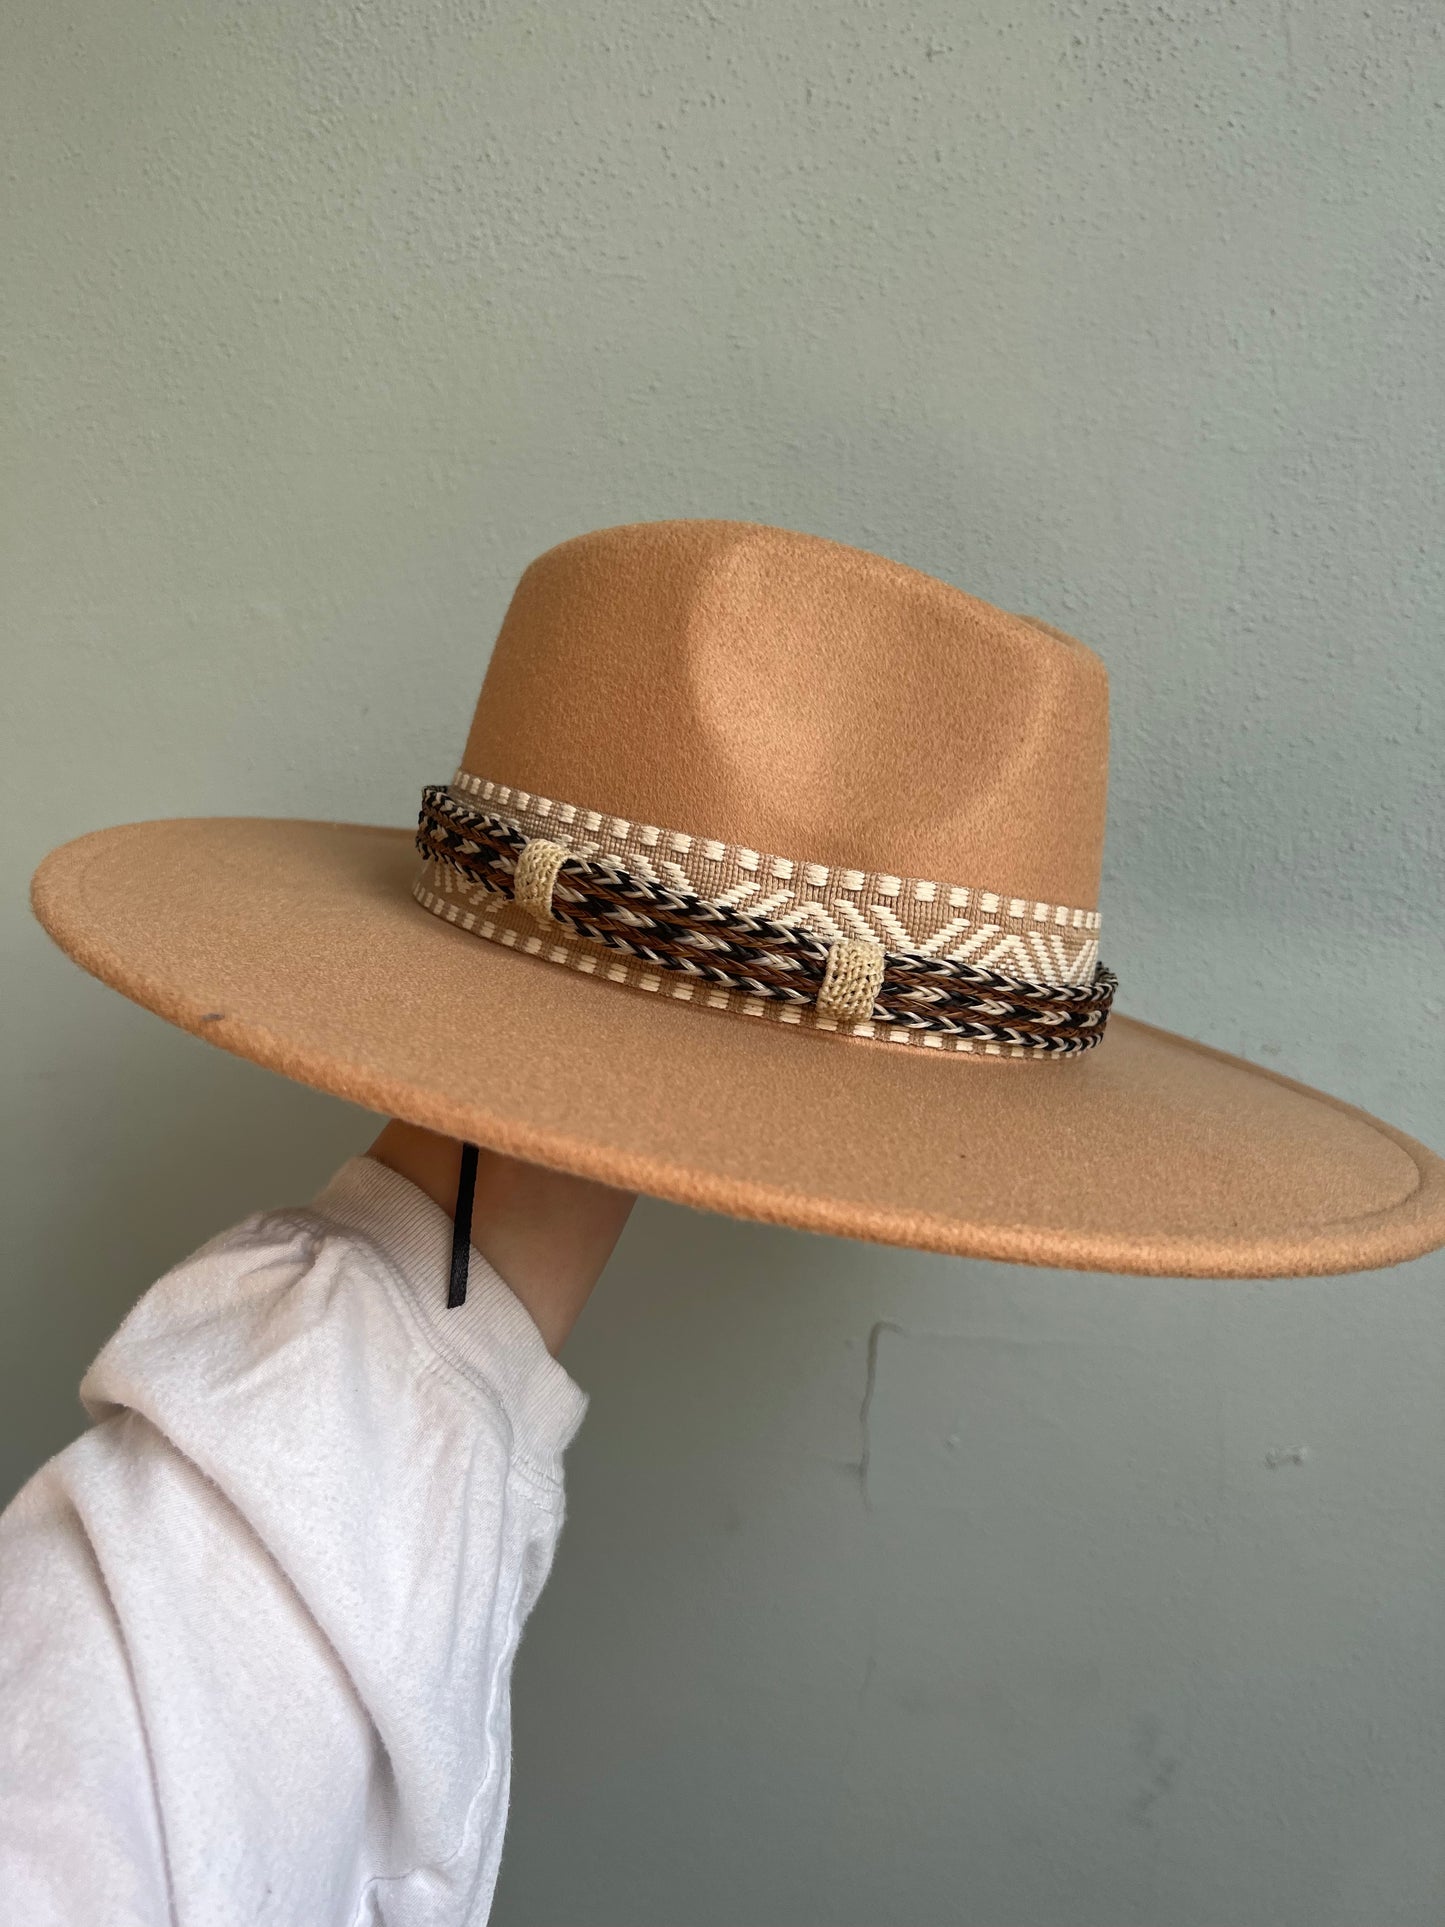 The Double Knot Hat Bands - Brown and Black